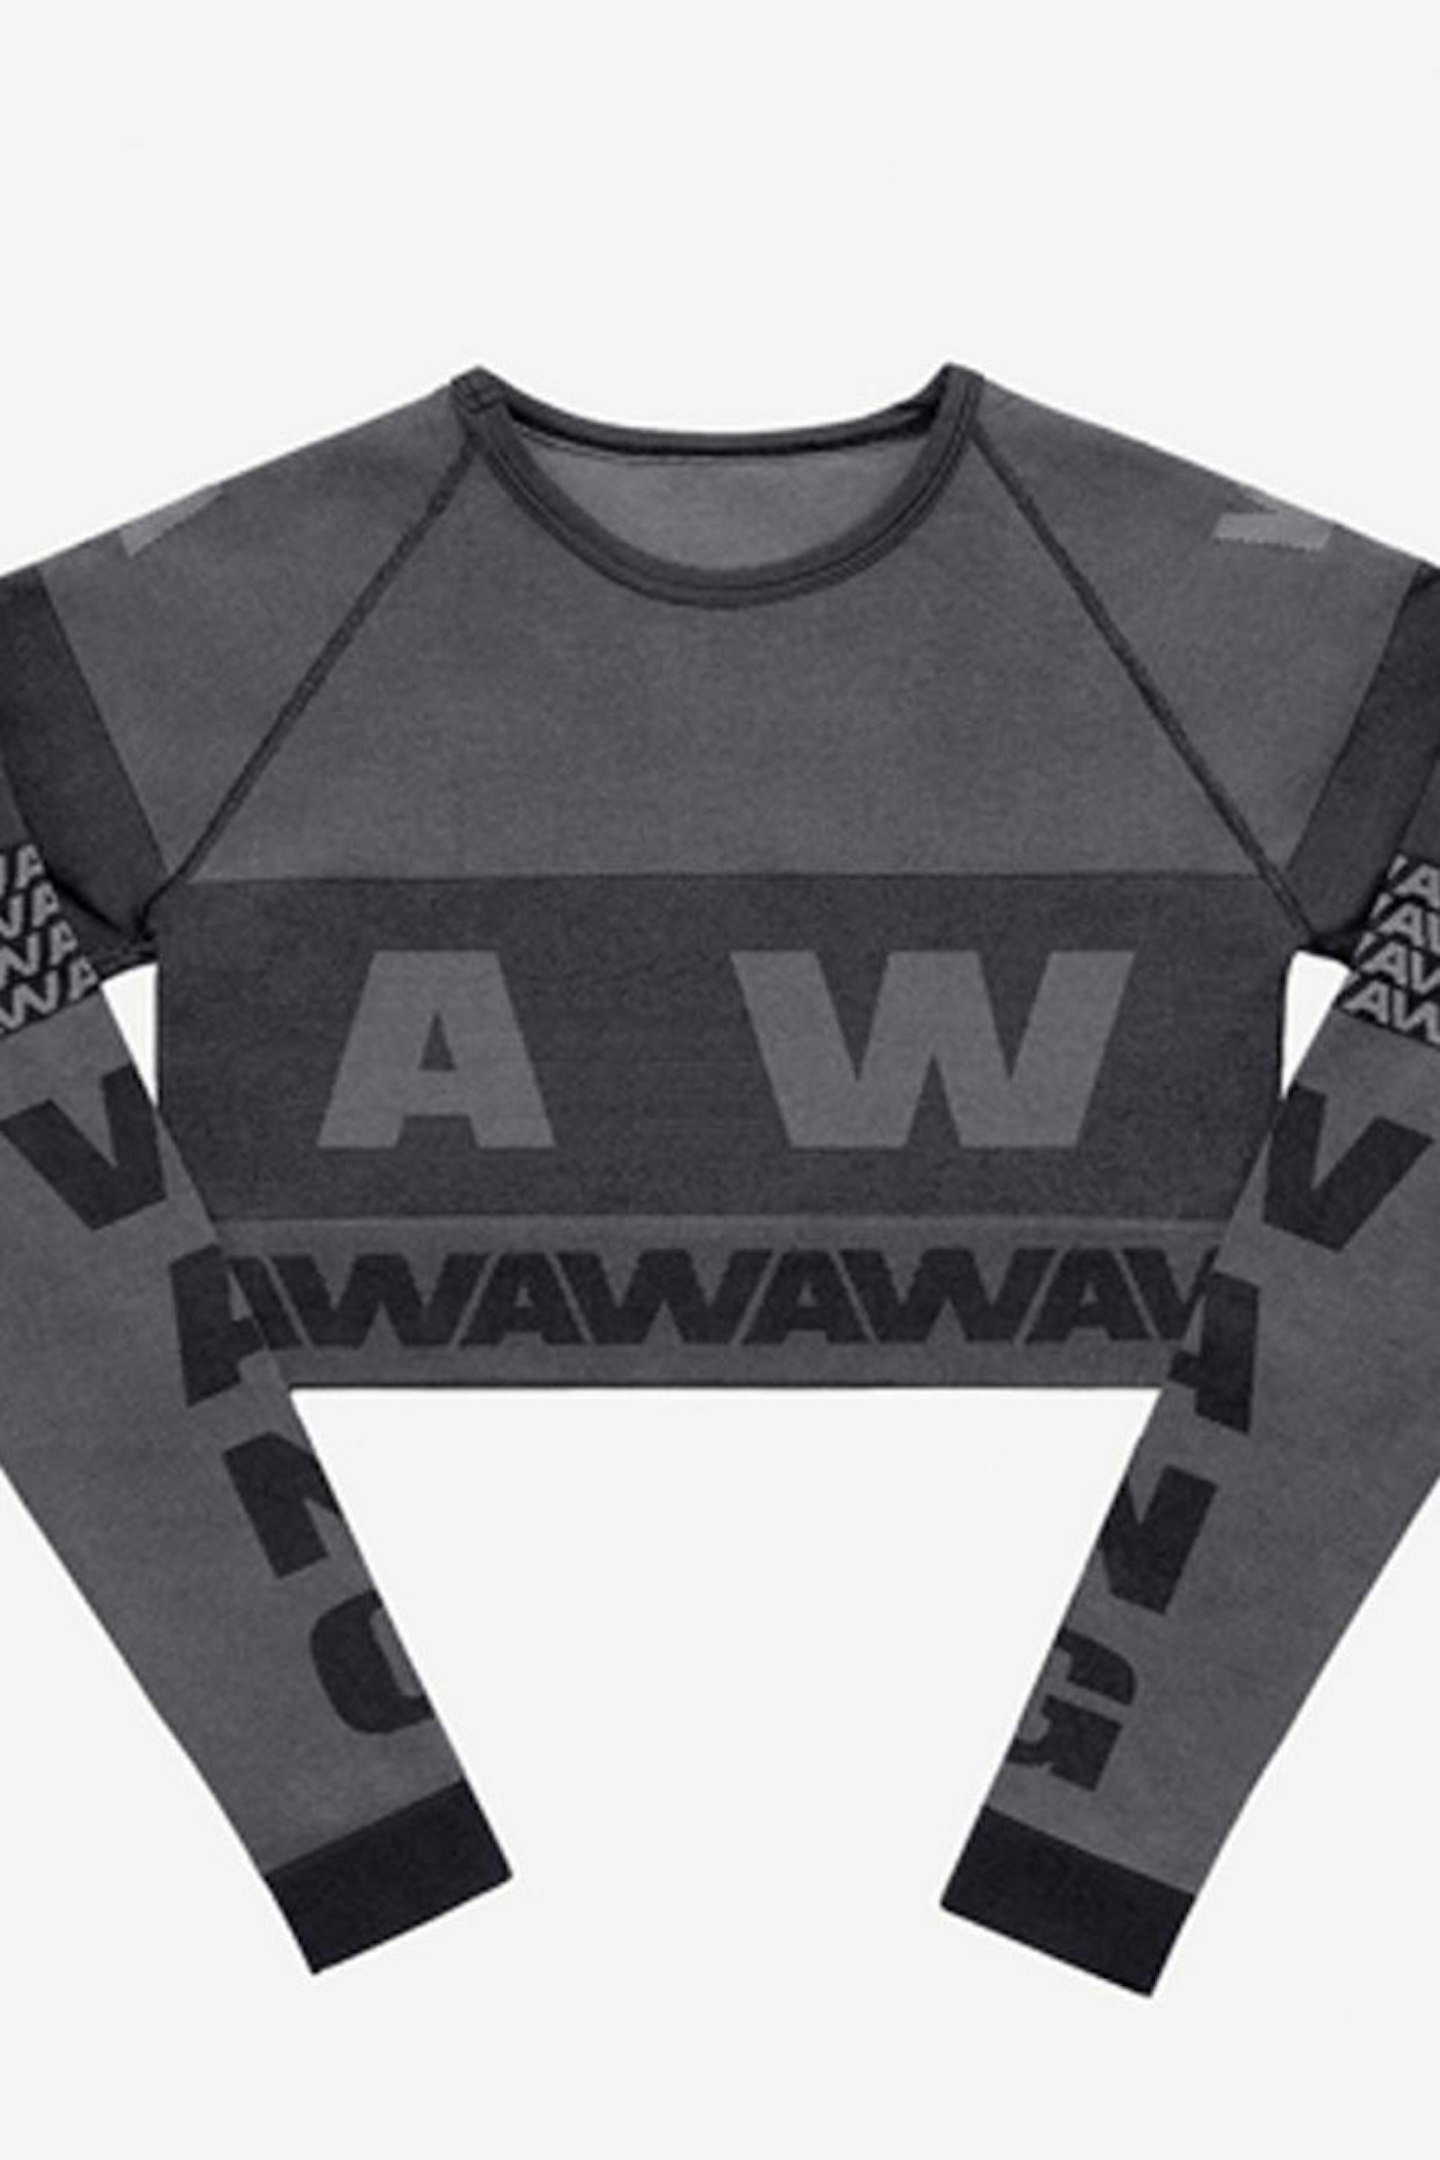 Cropped top £29.99 by Alexander Wang x H&M